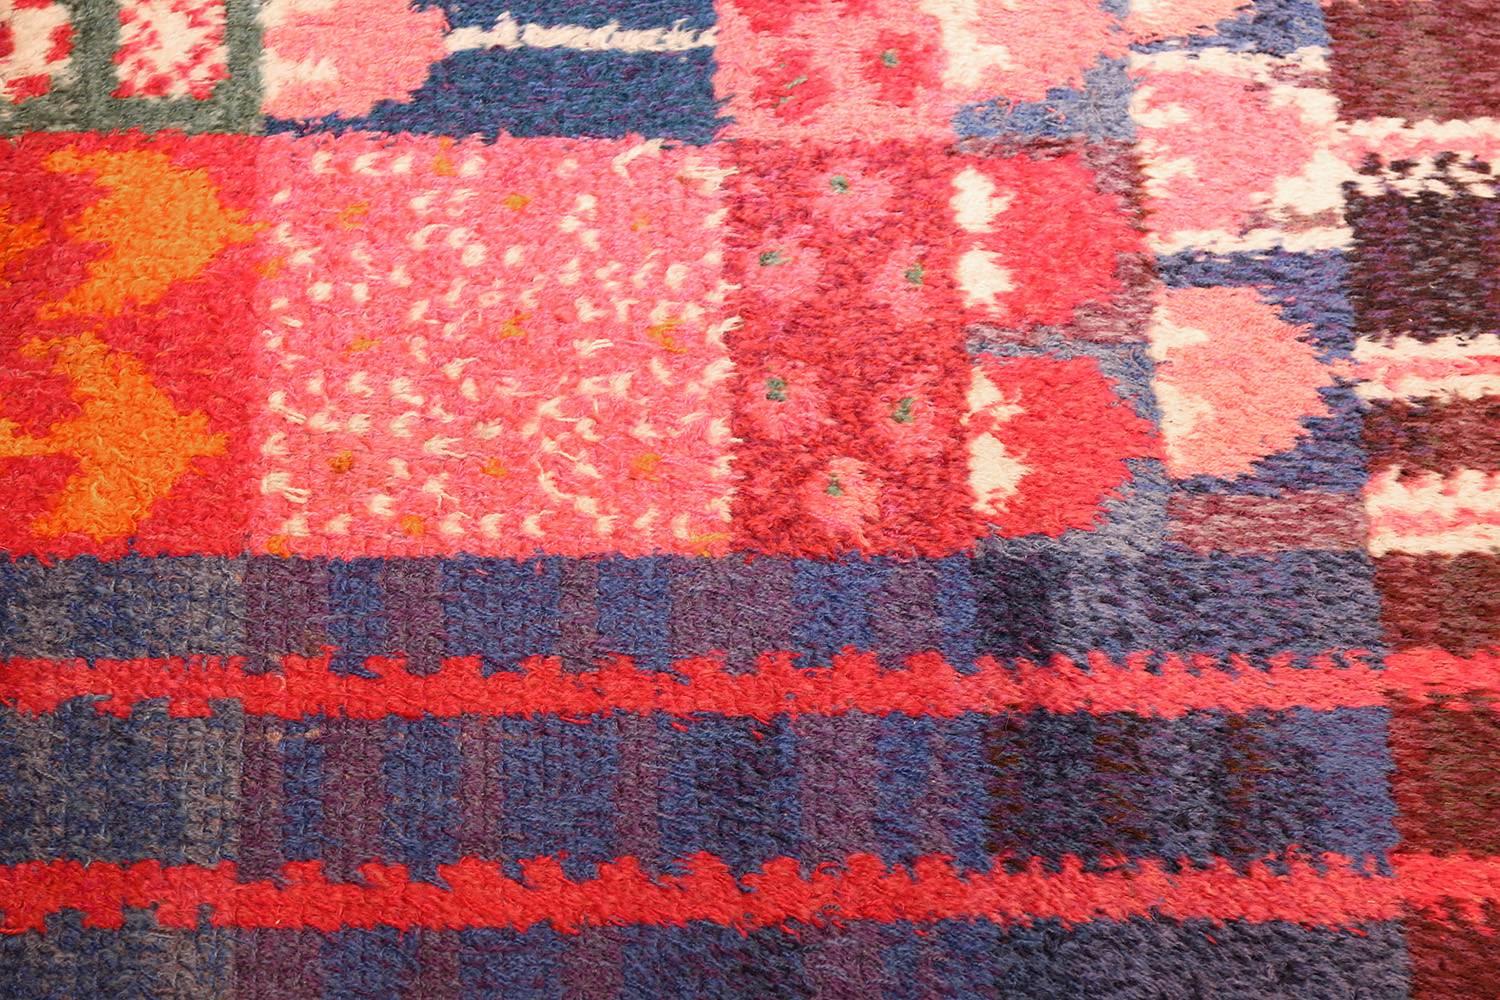 Vintage Rya Rug by Marianne Richter for Marta Maas. Size: 4 ft 6 in x 5 ft 8 in 1